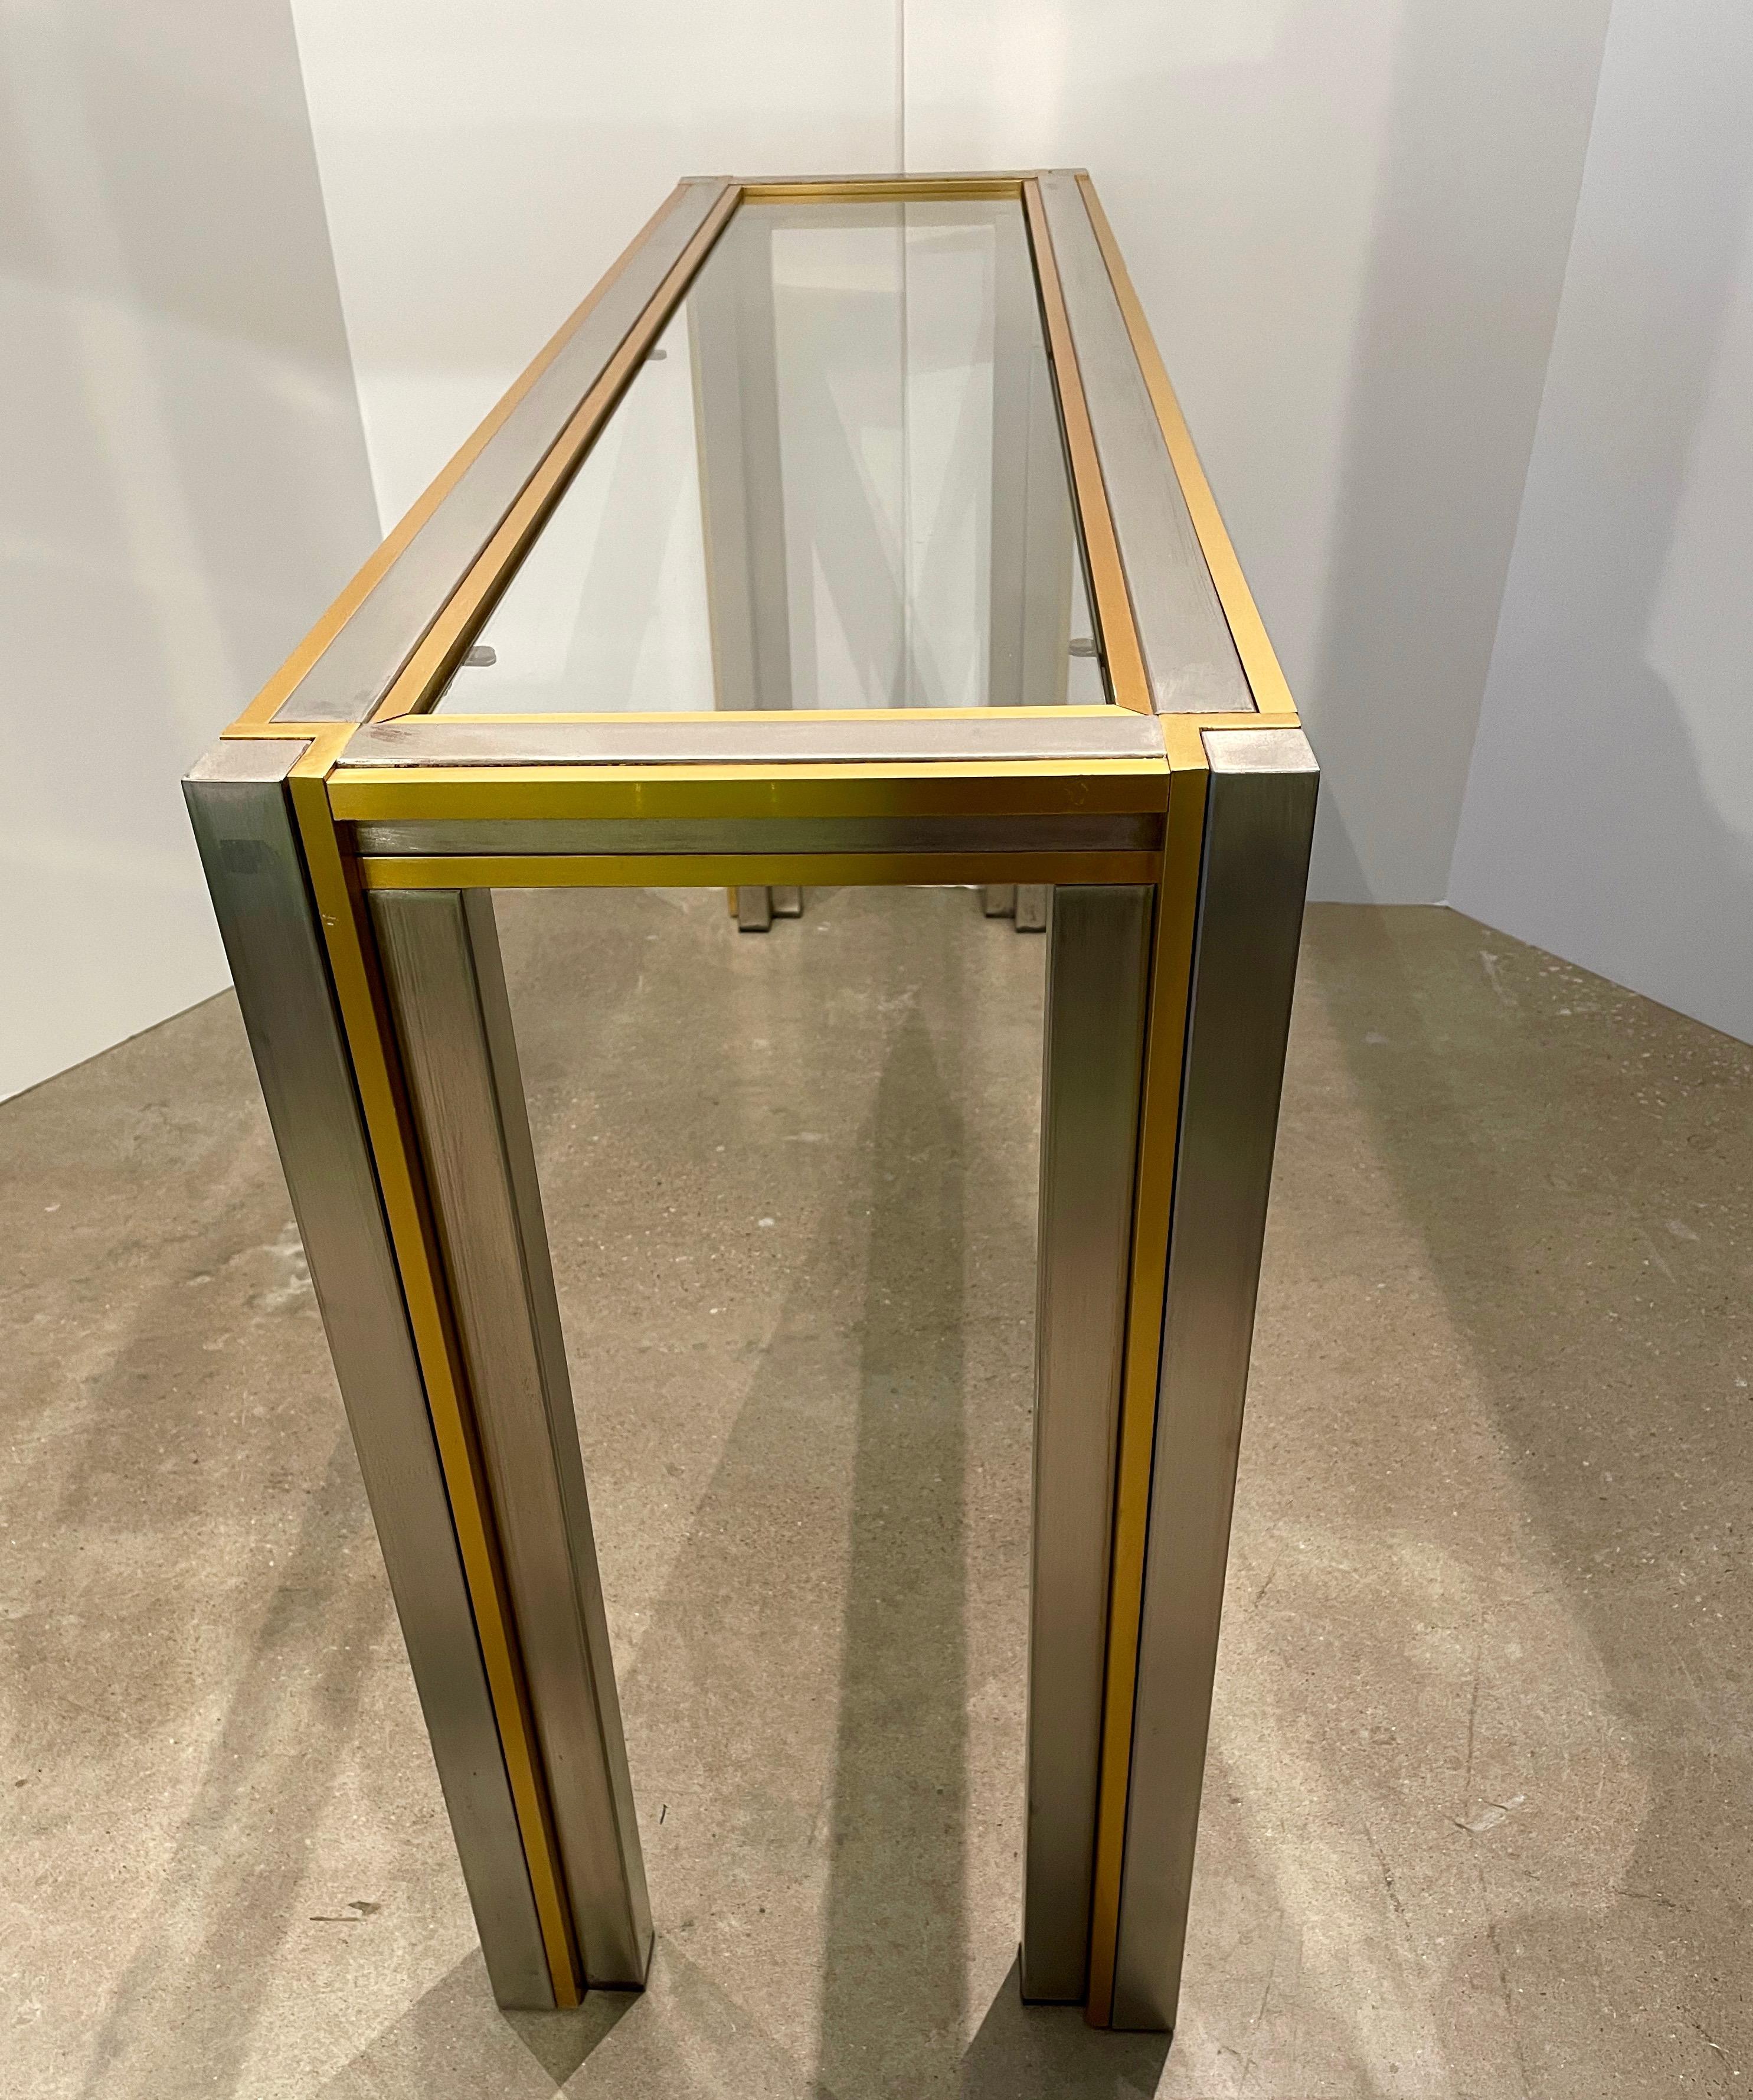 Anodized Willy Rizzo Attrib, Inlaid Glass, Gold Tone Aluminum & Steel Frame Console Table